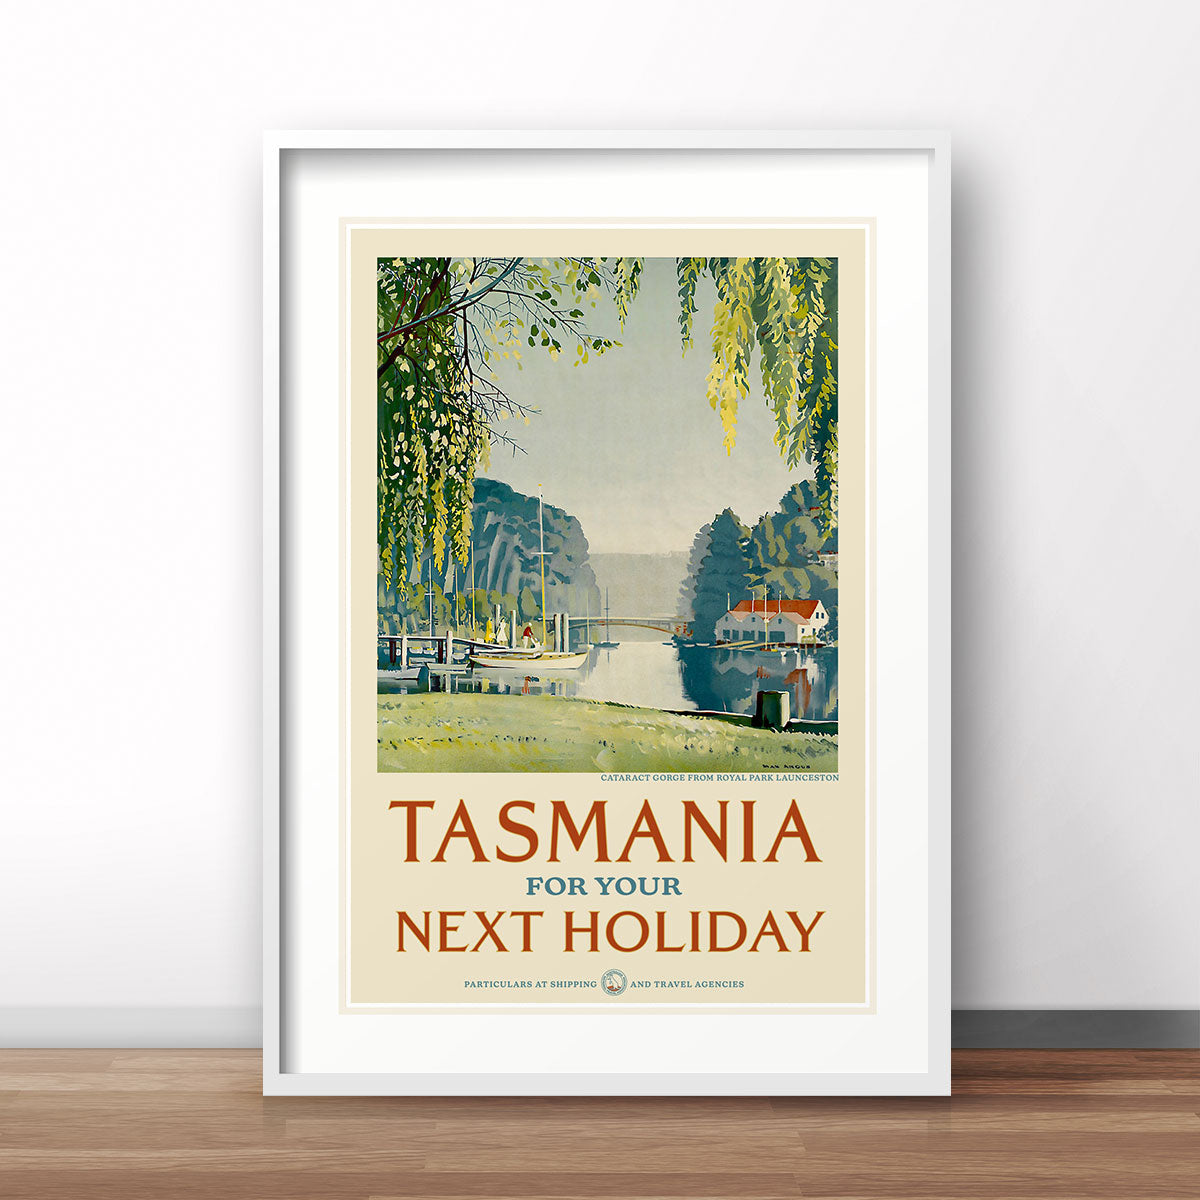 Tasmania nextholiday vintage advertising poster from Places We Luv